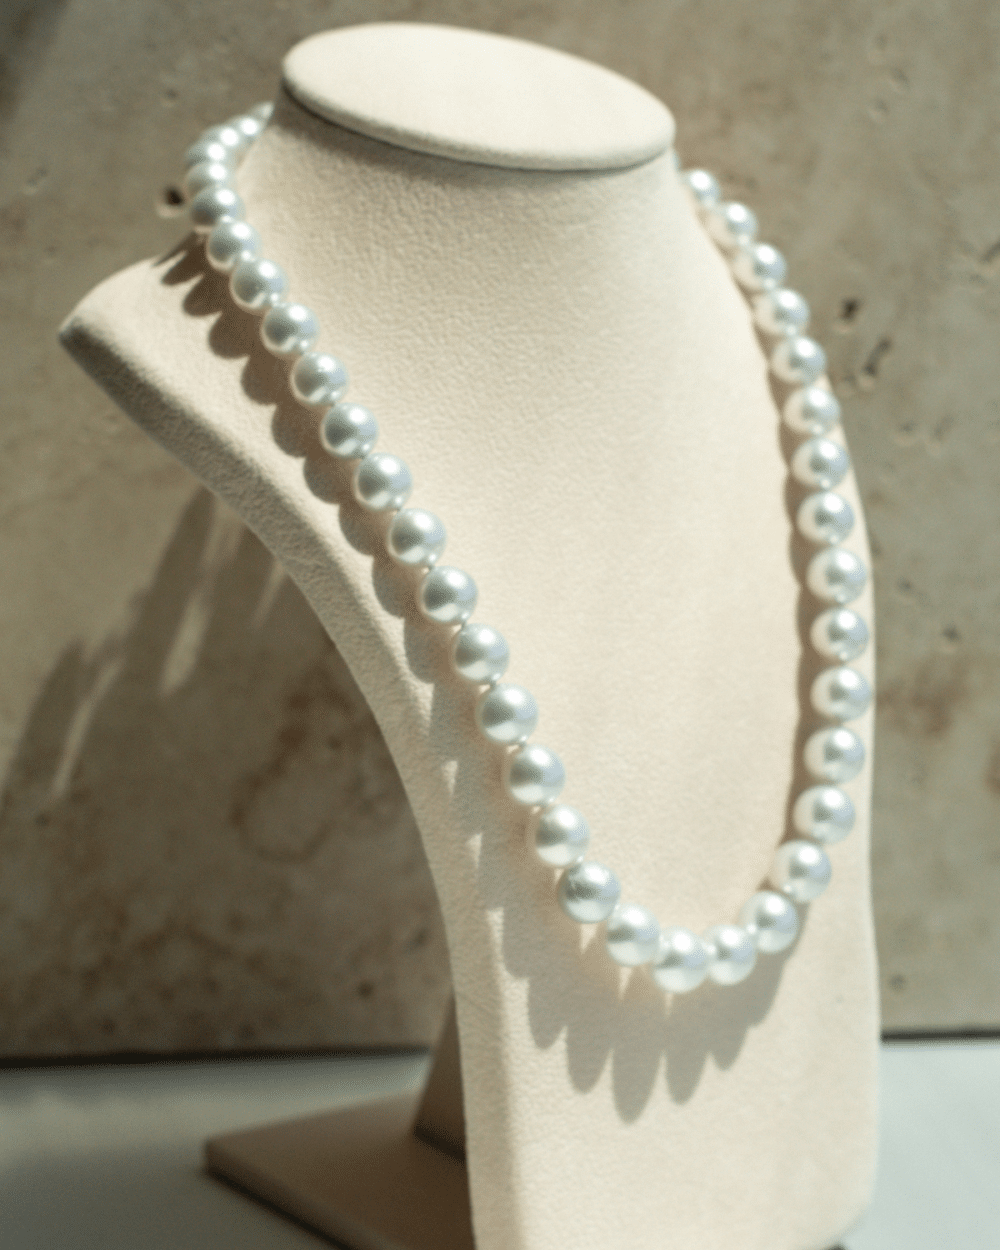 Baroque Pearl Strand 9.5-12mm A3+_B2+ 43pc 45cm on bust